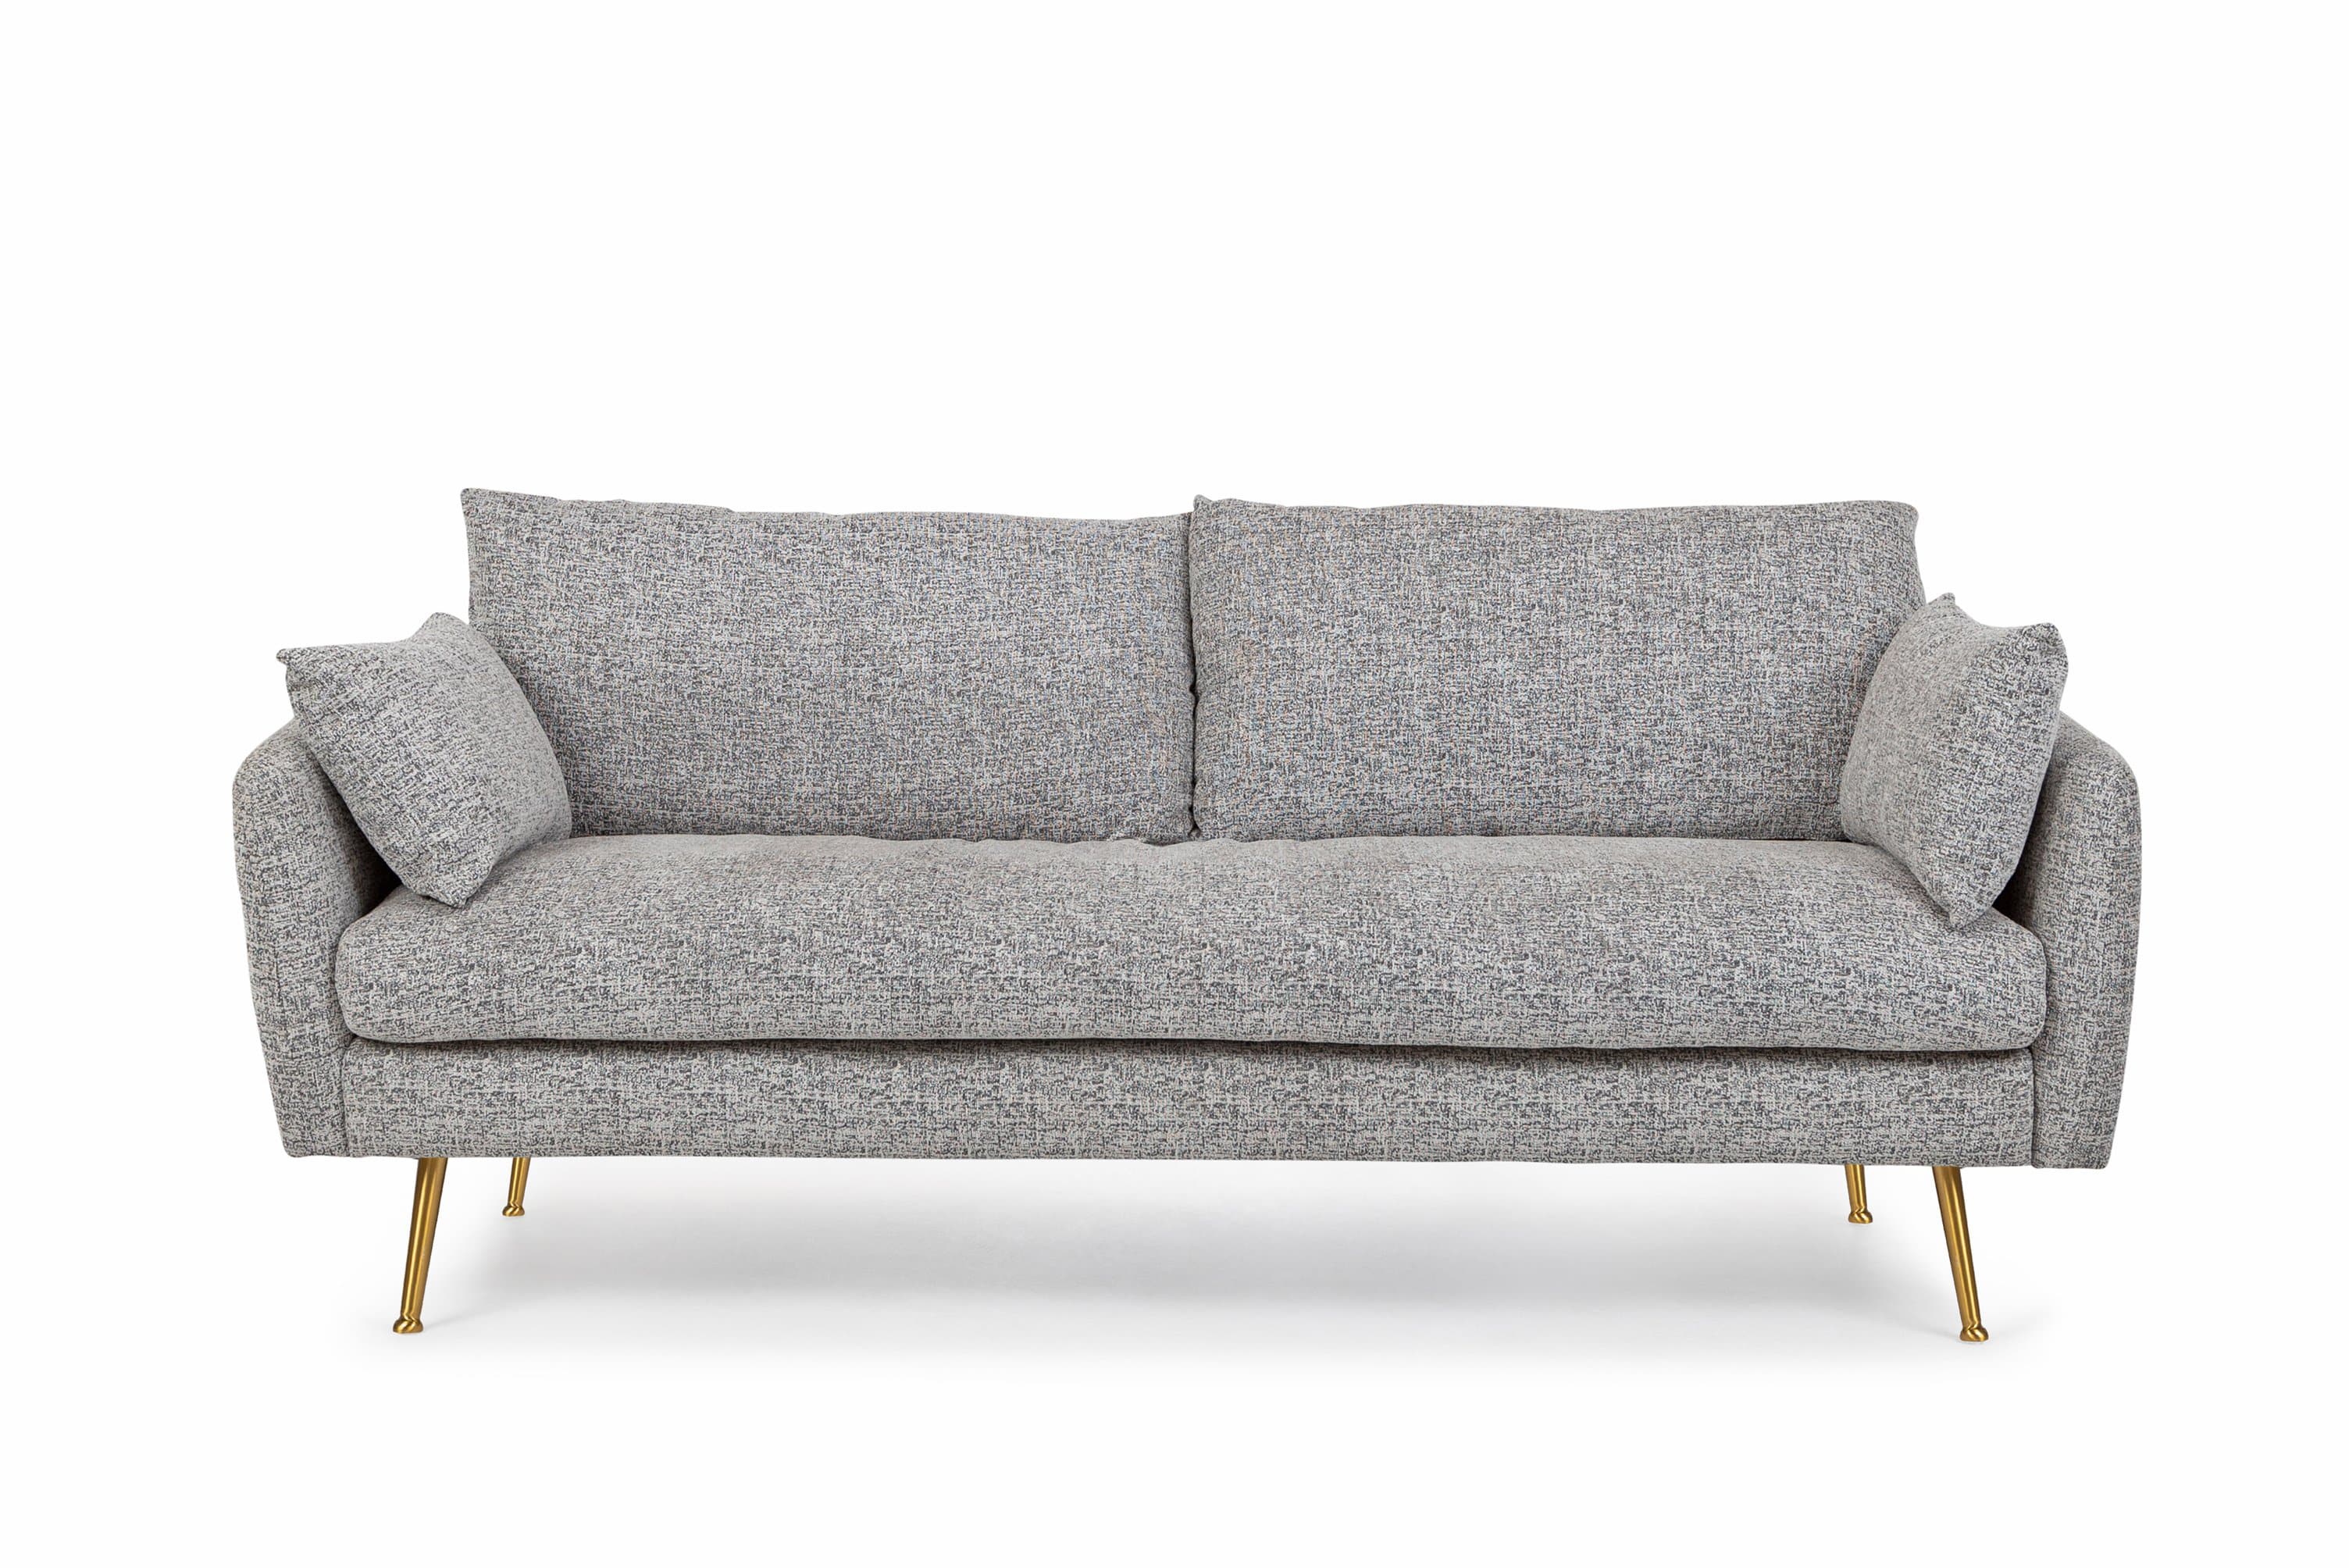 Albany Park 82 Round Arm Sofa With Reversible Cushions Gray Fabric Gold 35 0 H X W D